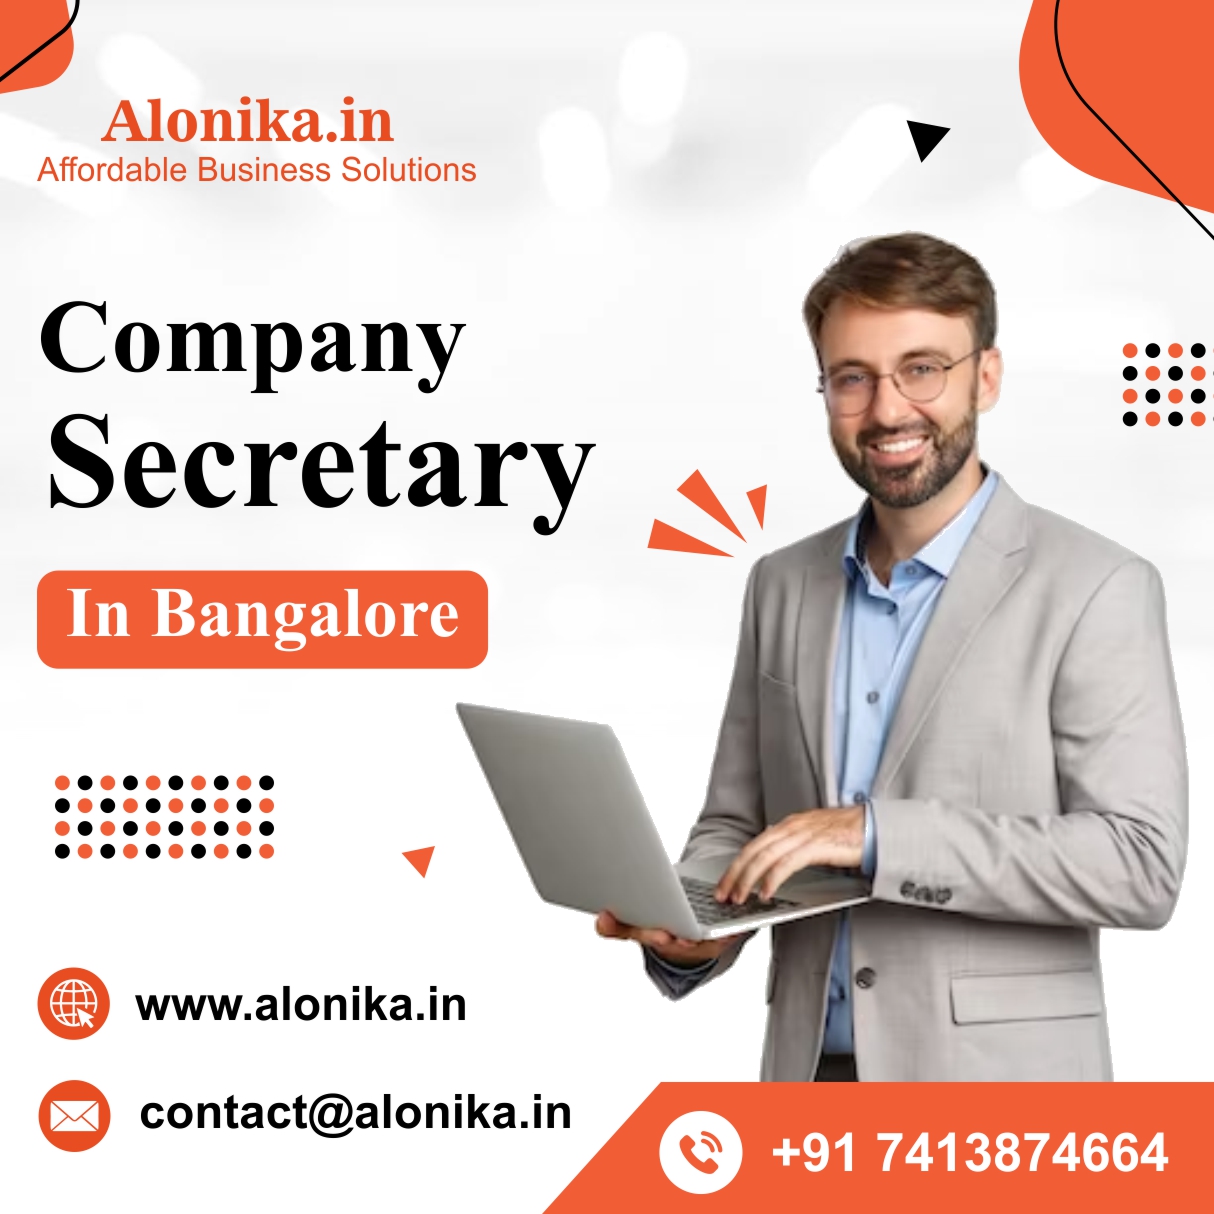 What are the core responsibilities and functions of a Company Secretary in Bangalore, India?